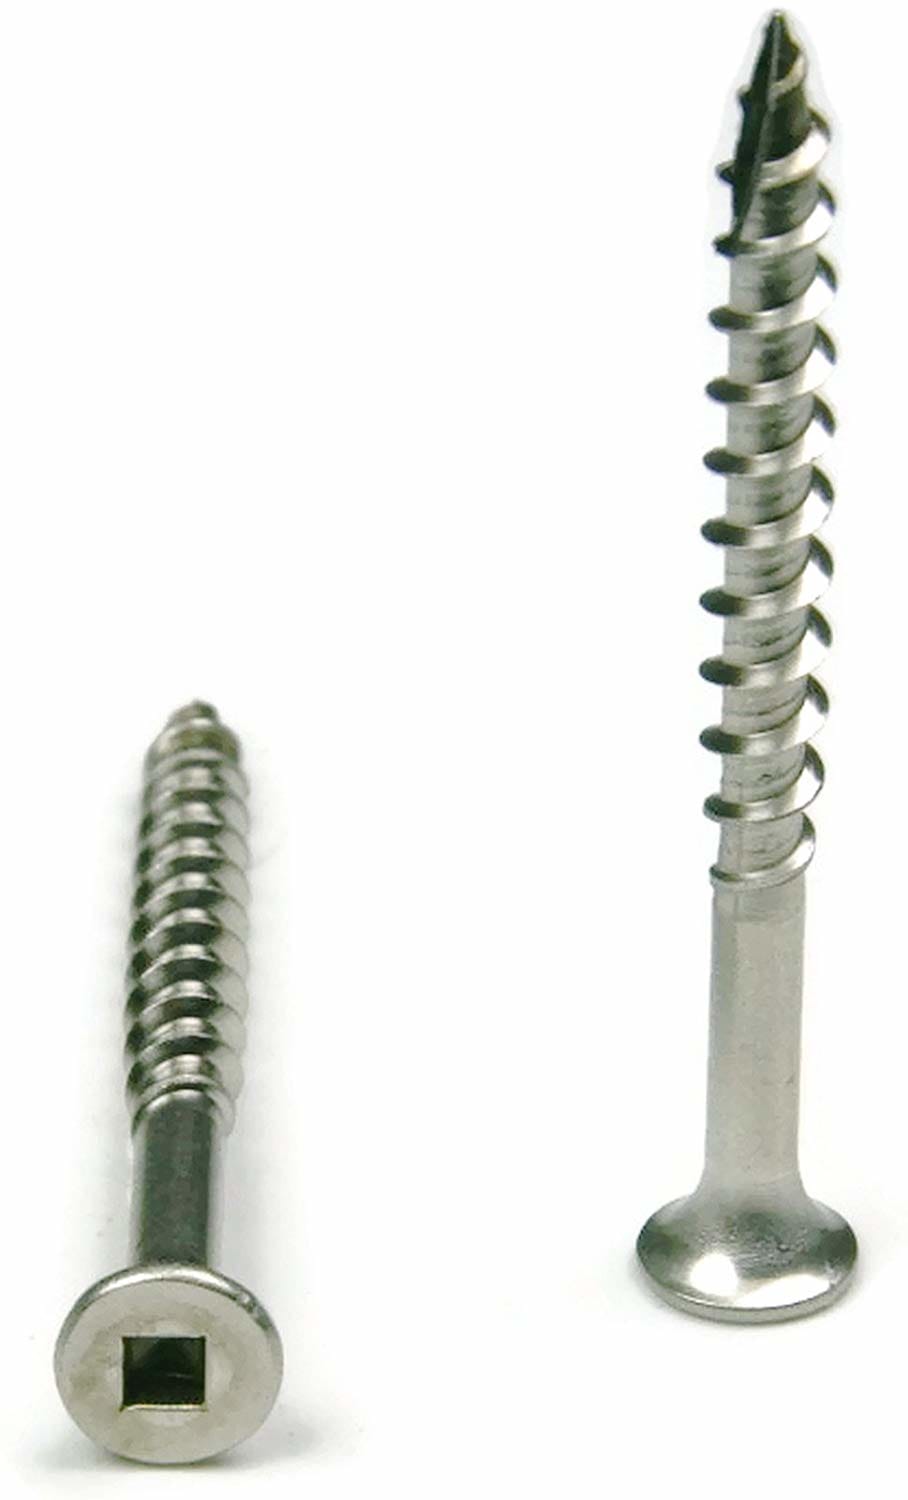 #14 x 2-1/2" Stainless Steel Wood Screw Square Drive, Bugle Head (Quantity: 800) Type 17 Wood Cutting Point, 1-3/4" of Thread Length, #14 Screw Diameter, 2-1/2" Screw Length - image 1 of 1